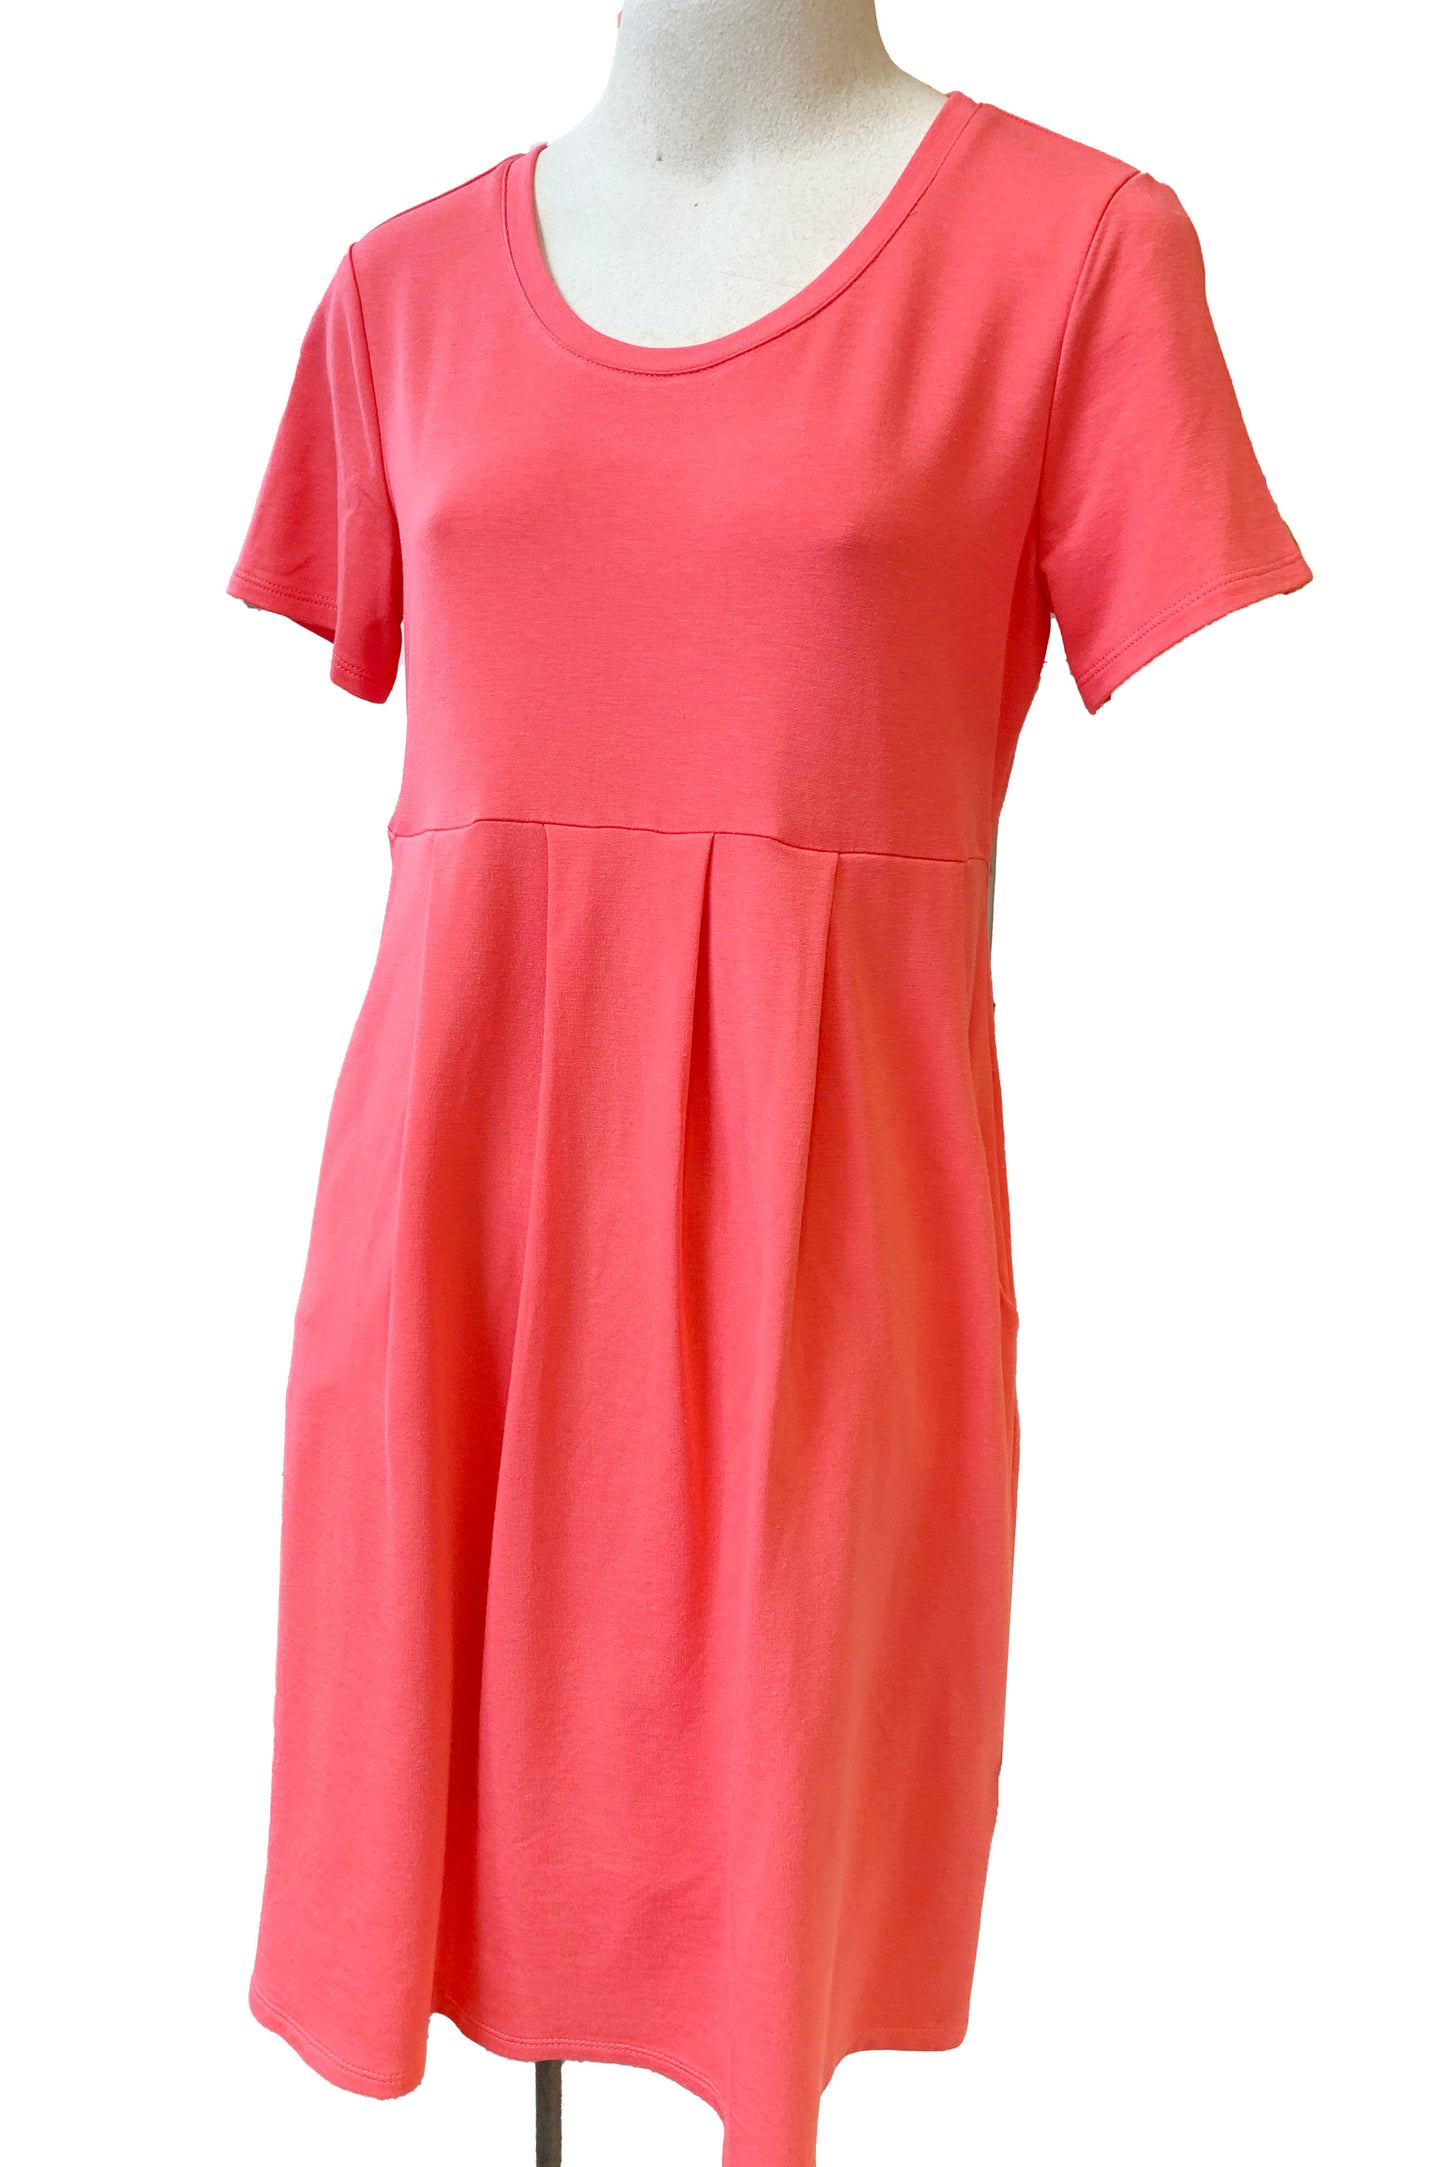 Caitlin Dress by Pure Essence, Coral, round neck, short sleeves, baby-doll style, gathers at waist, pockets, knee-length, sizes XS to XXL, made in Canada